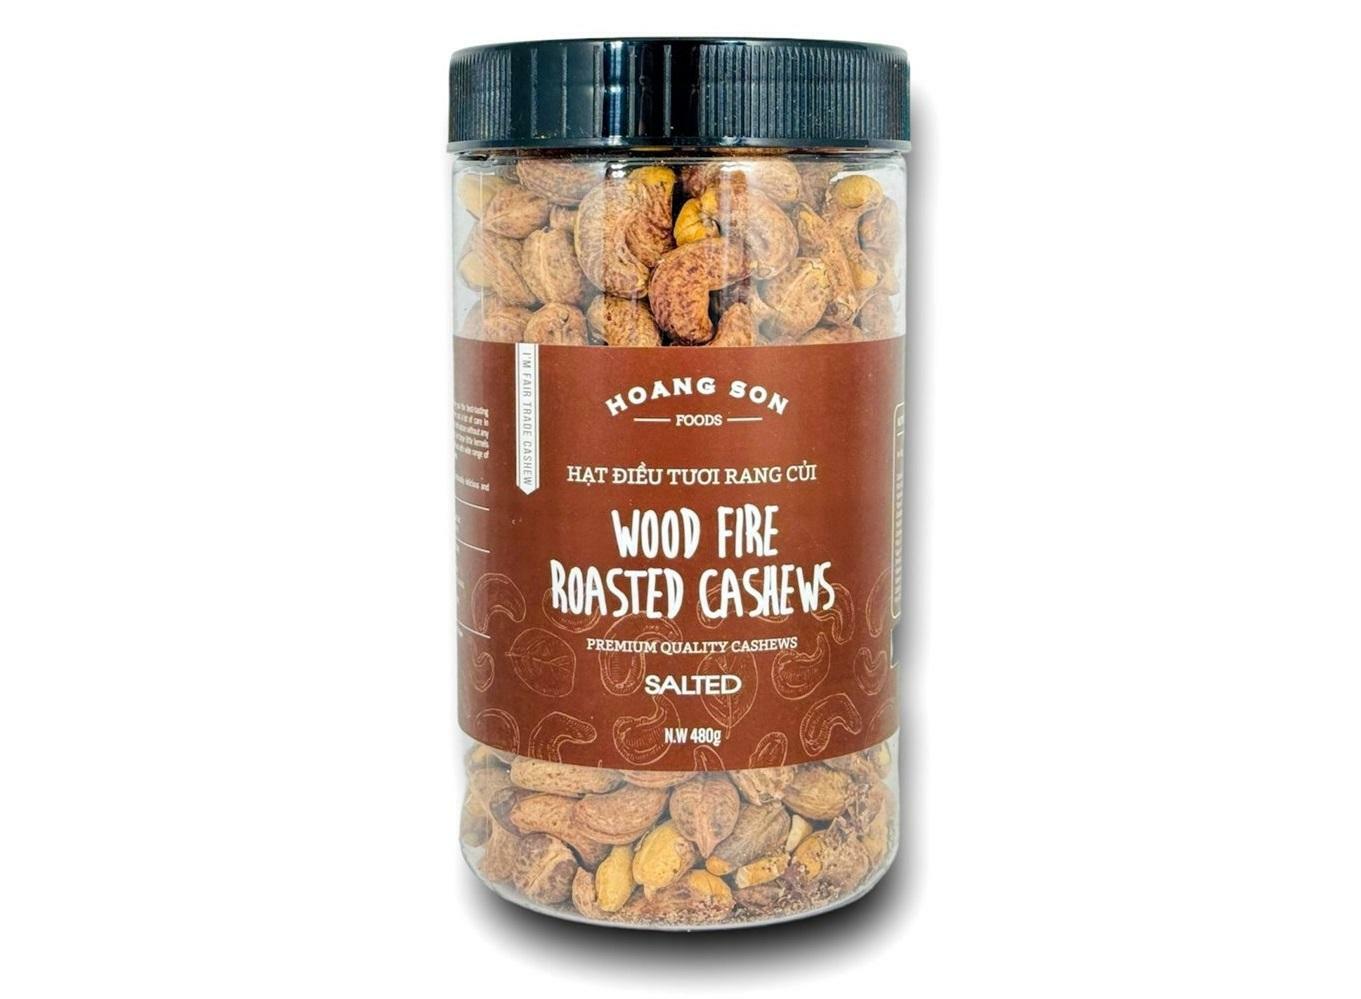 Wood Fire Roasted Cashews Salted